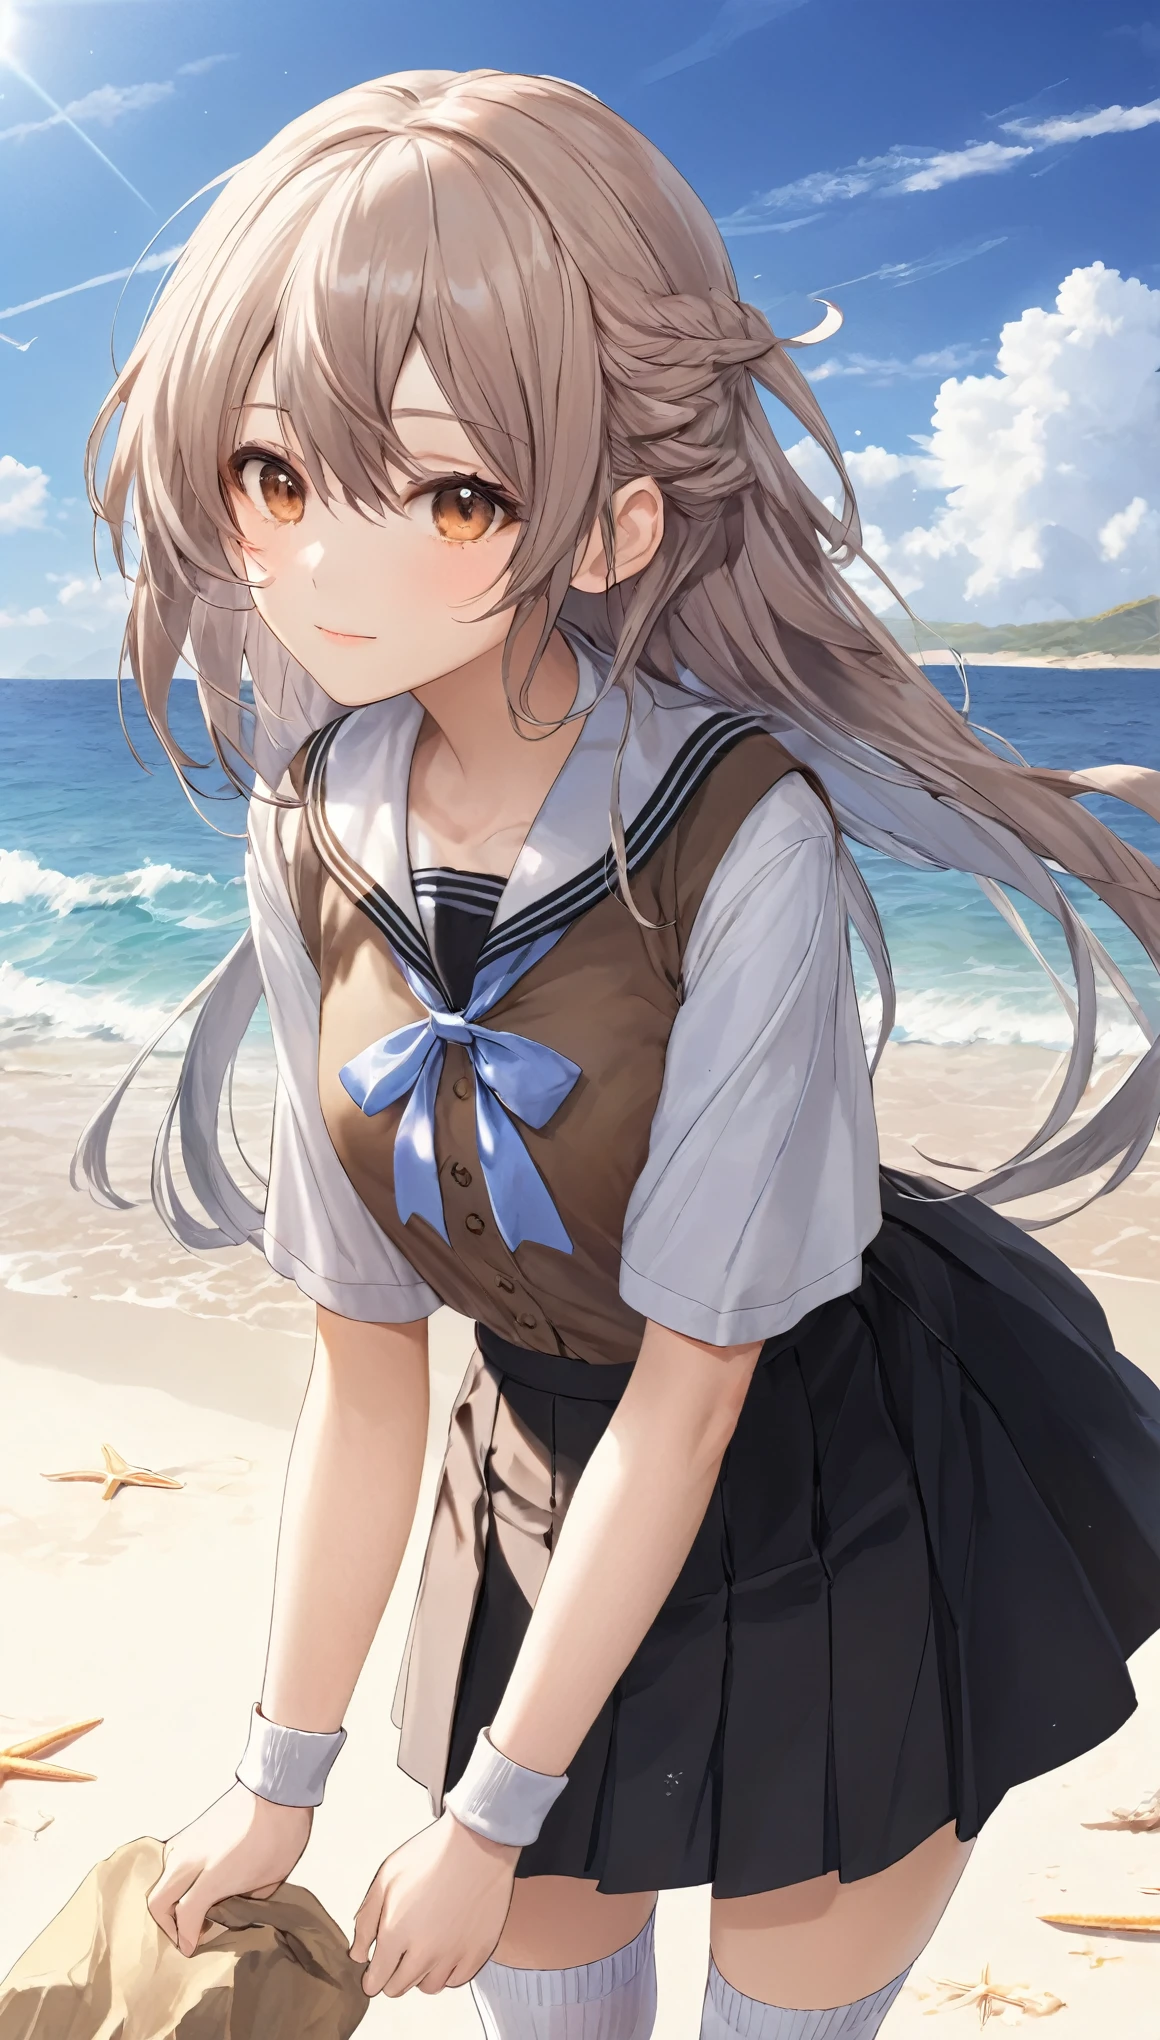 ((masterpiece)), ((highest quality)), ((High resolution)), ((Highly detailed CG Unity 8k wallpaper)), alone, tachibana kanade, Brown uniform, Black Skirt, White socks, Outdoor, face, Beach, Hanging hair, Parted hair, Silver Hair